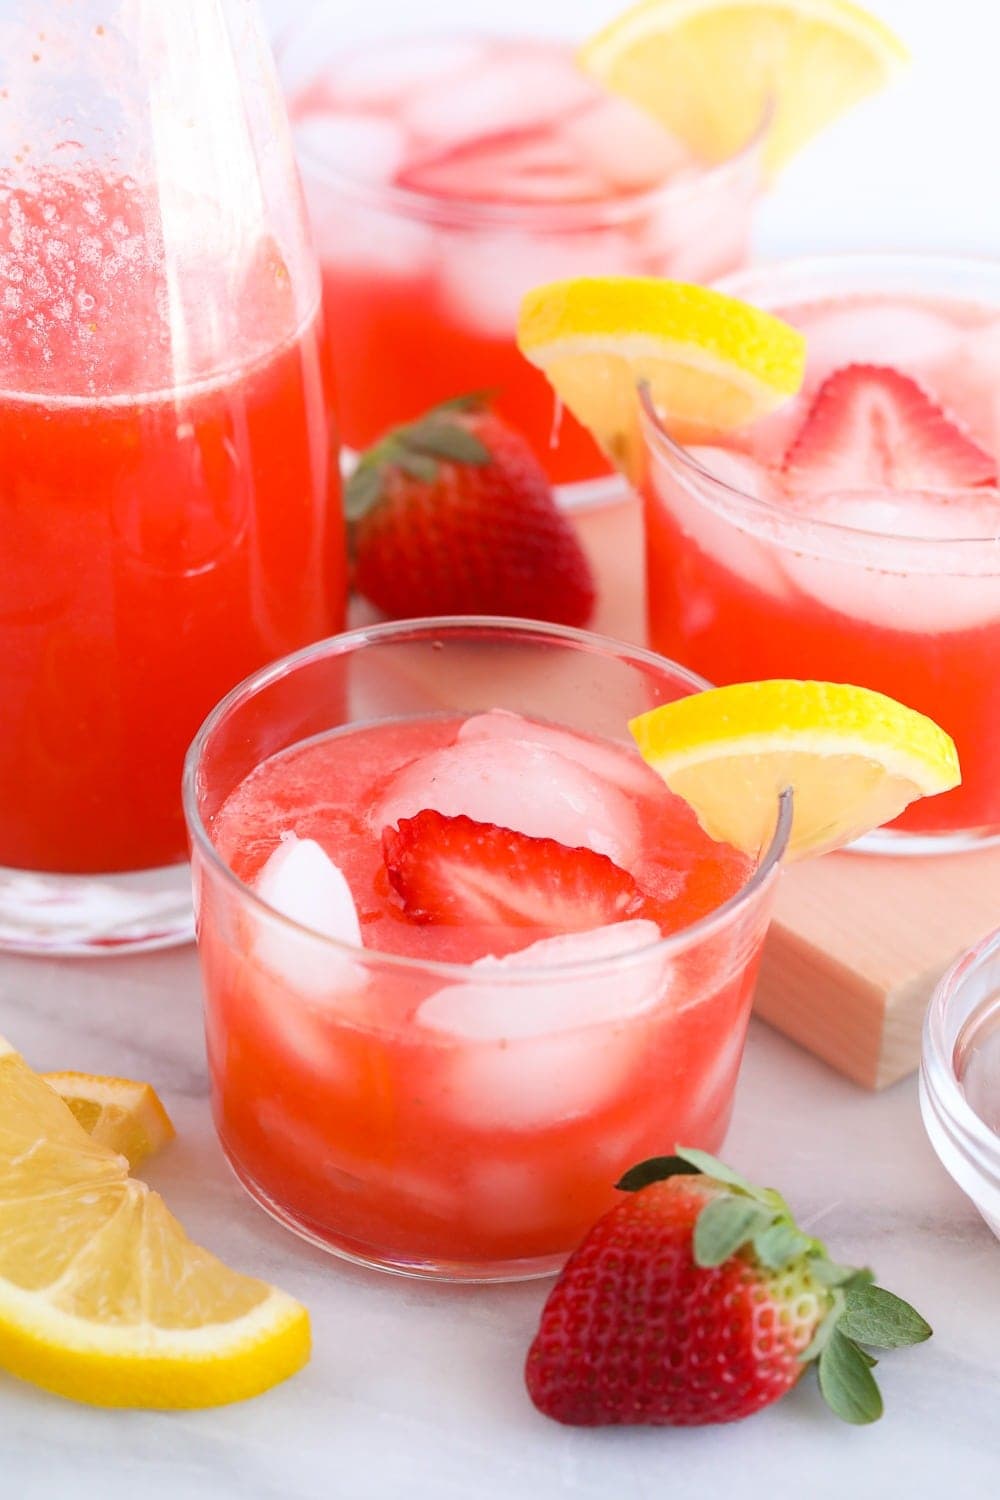 strawberry vodka lemonade in a glass looking delicious